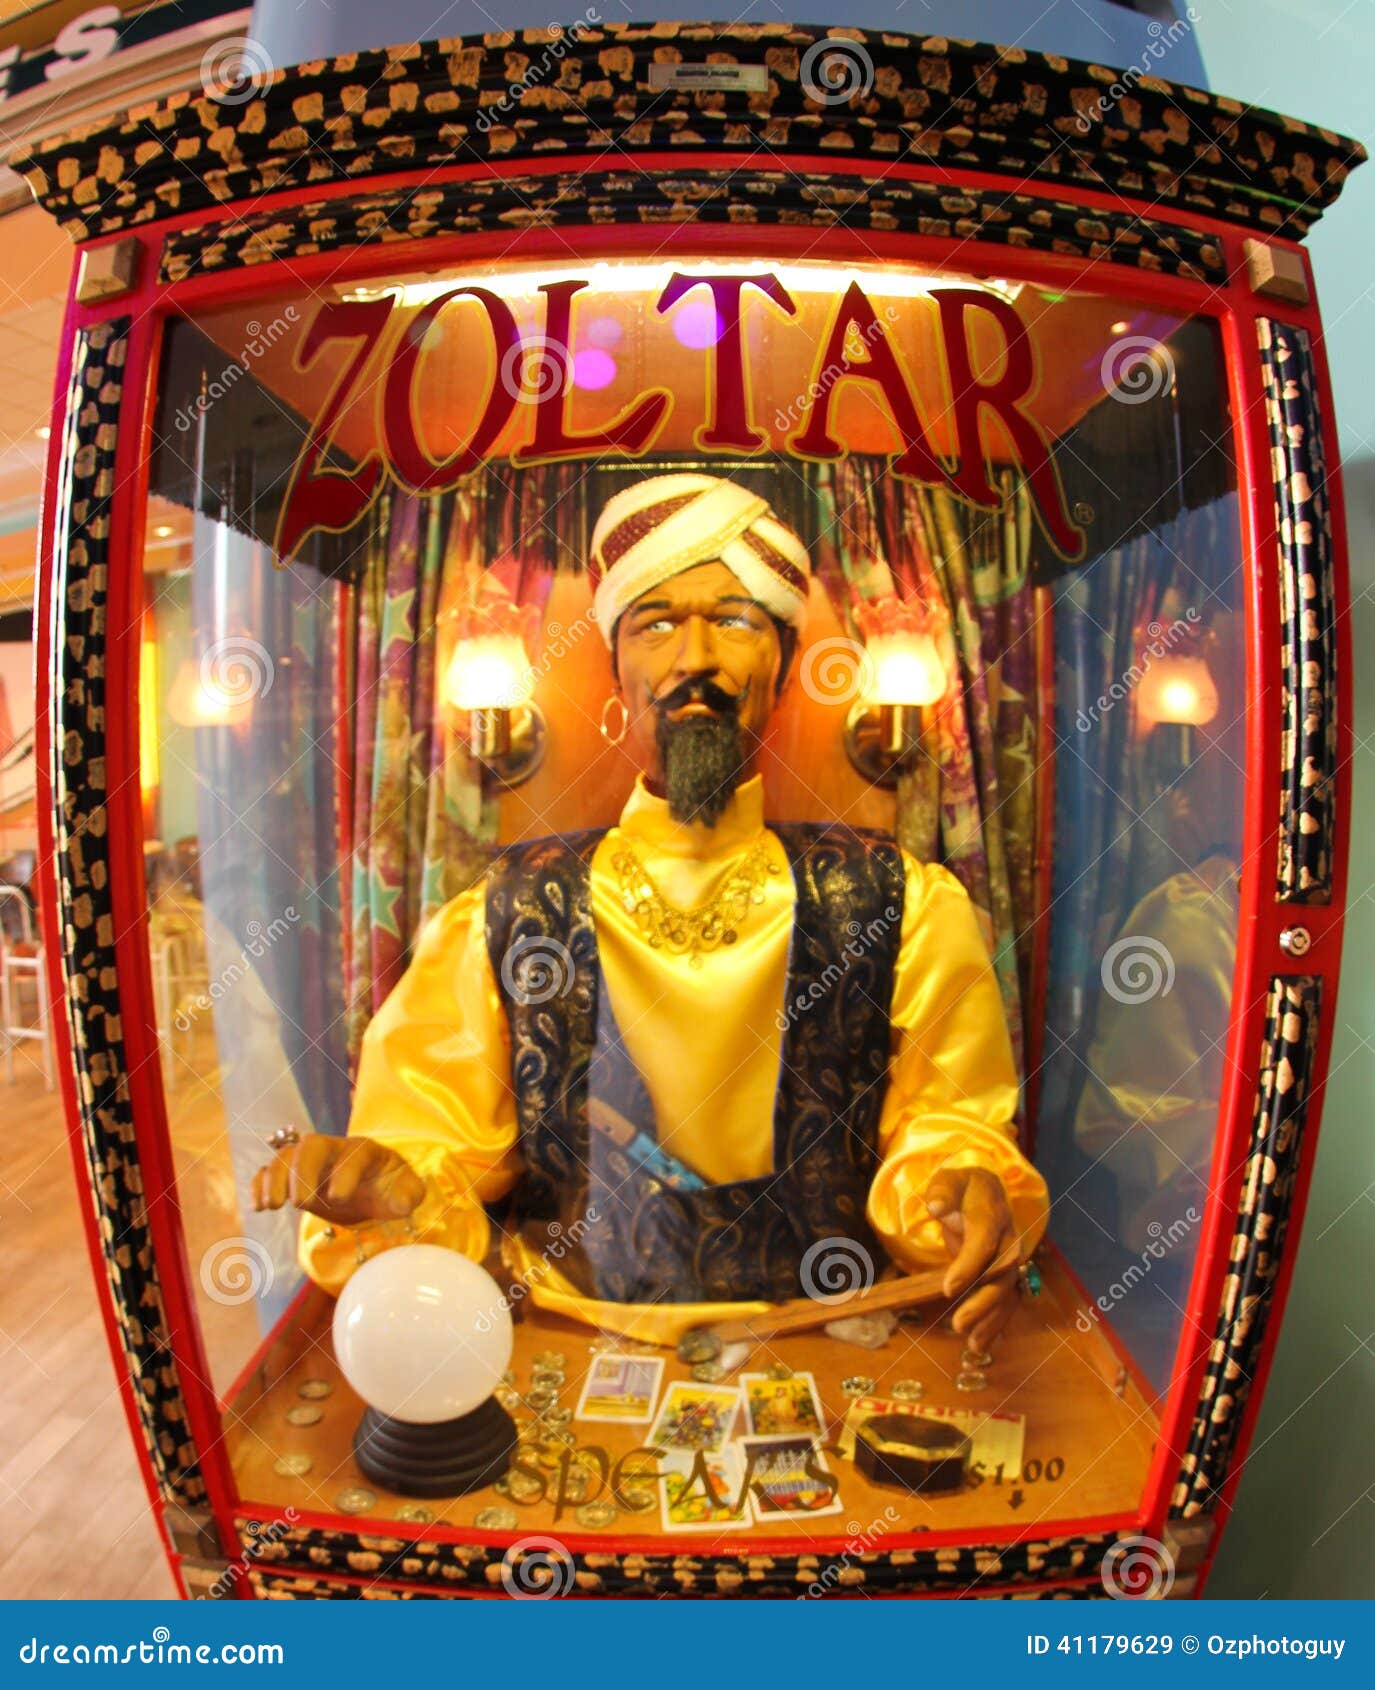 zoltar-fort-lauderdale-usa-may-animatronic-fortune-telling-machine-popularized-s-tom-hanks-movie-big-particular-41179629.jpg